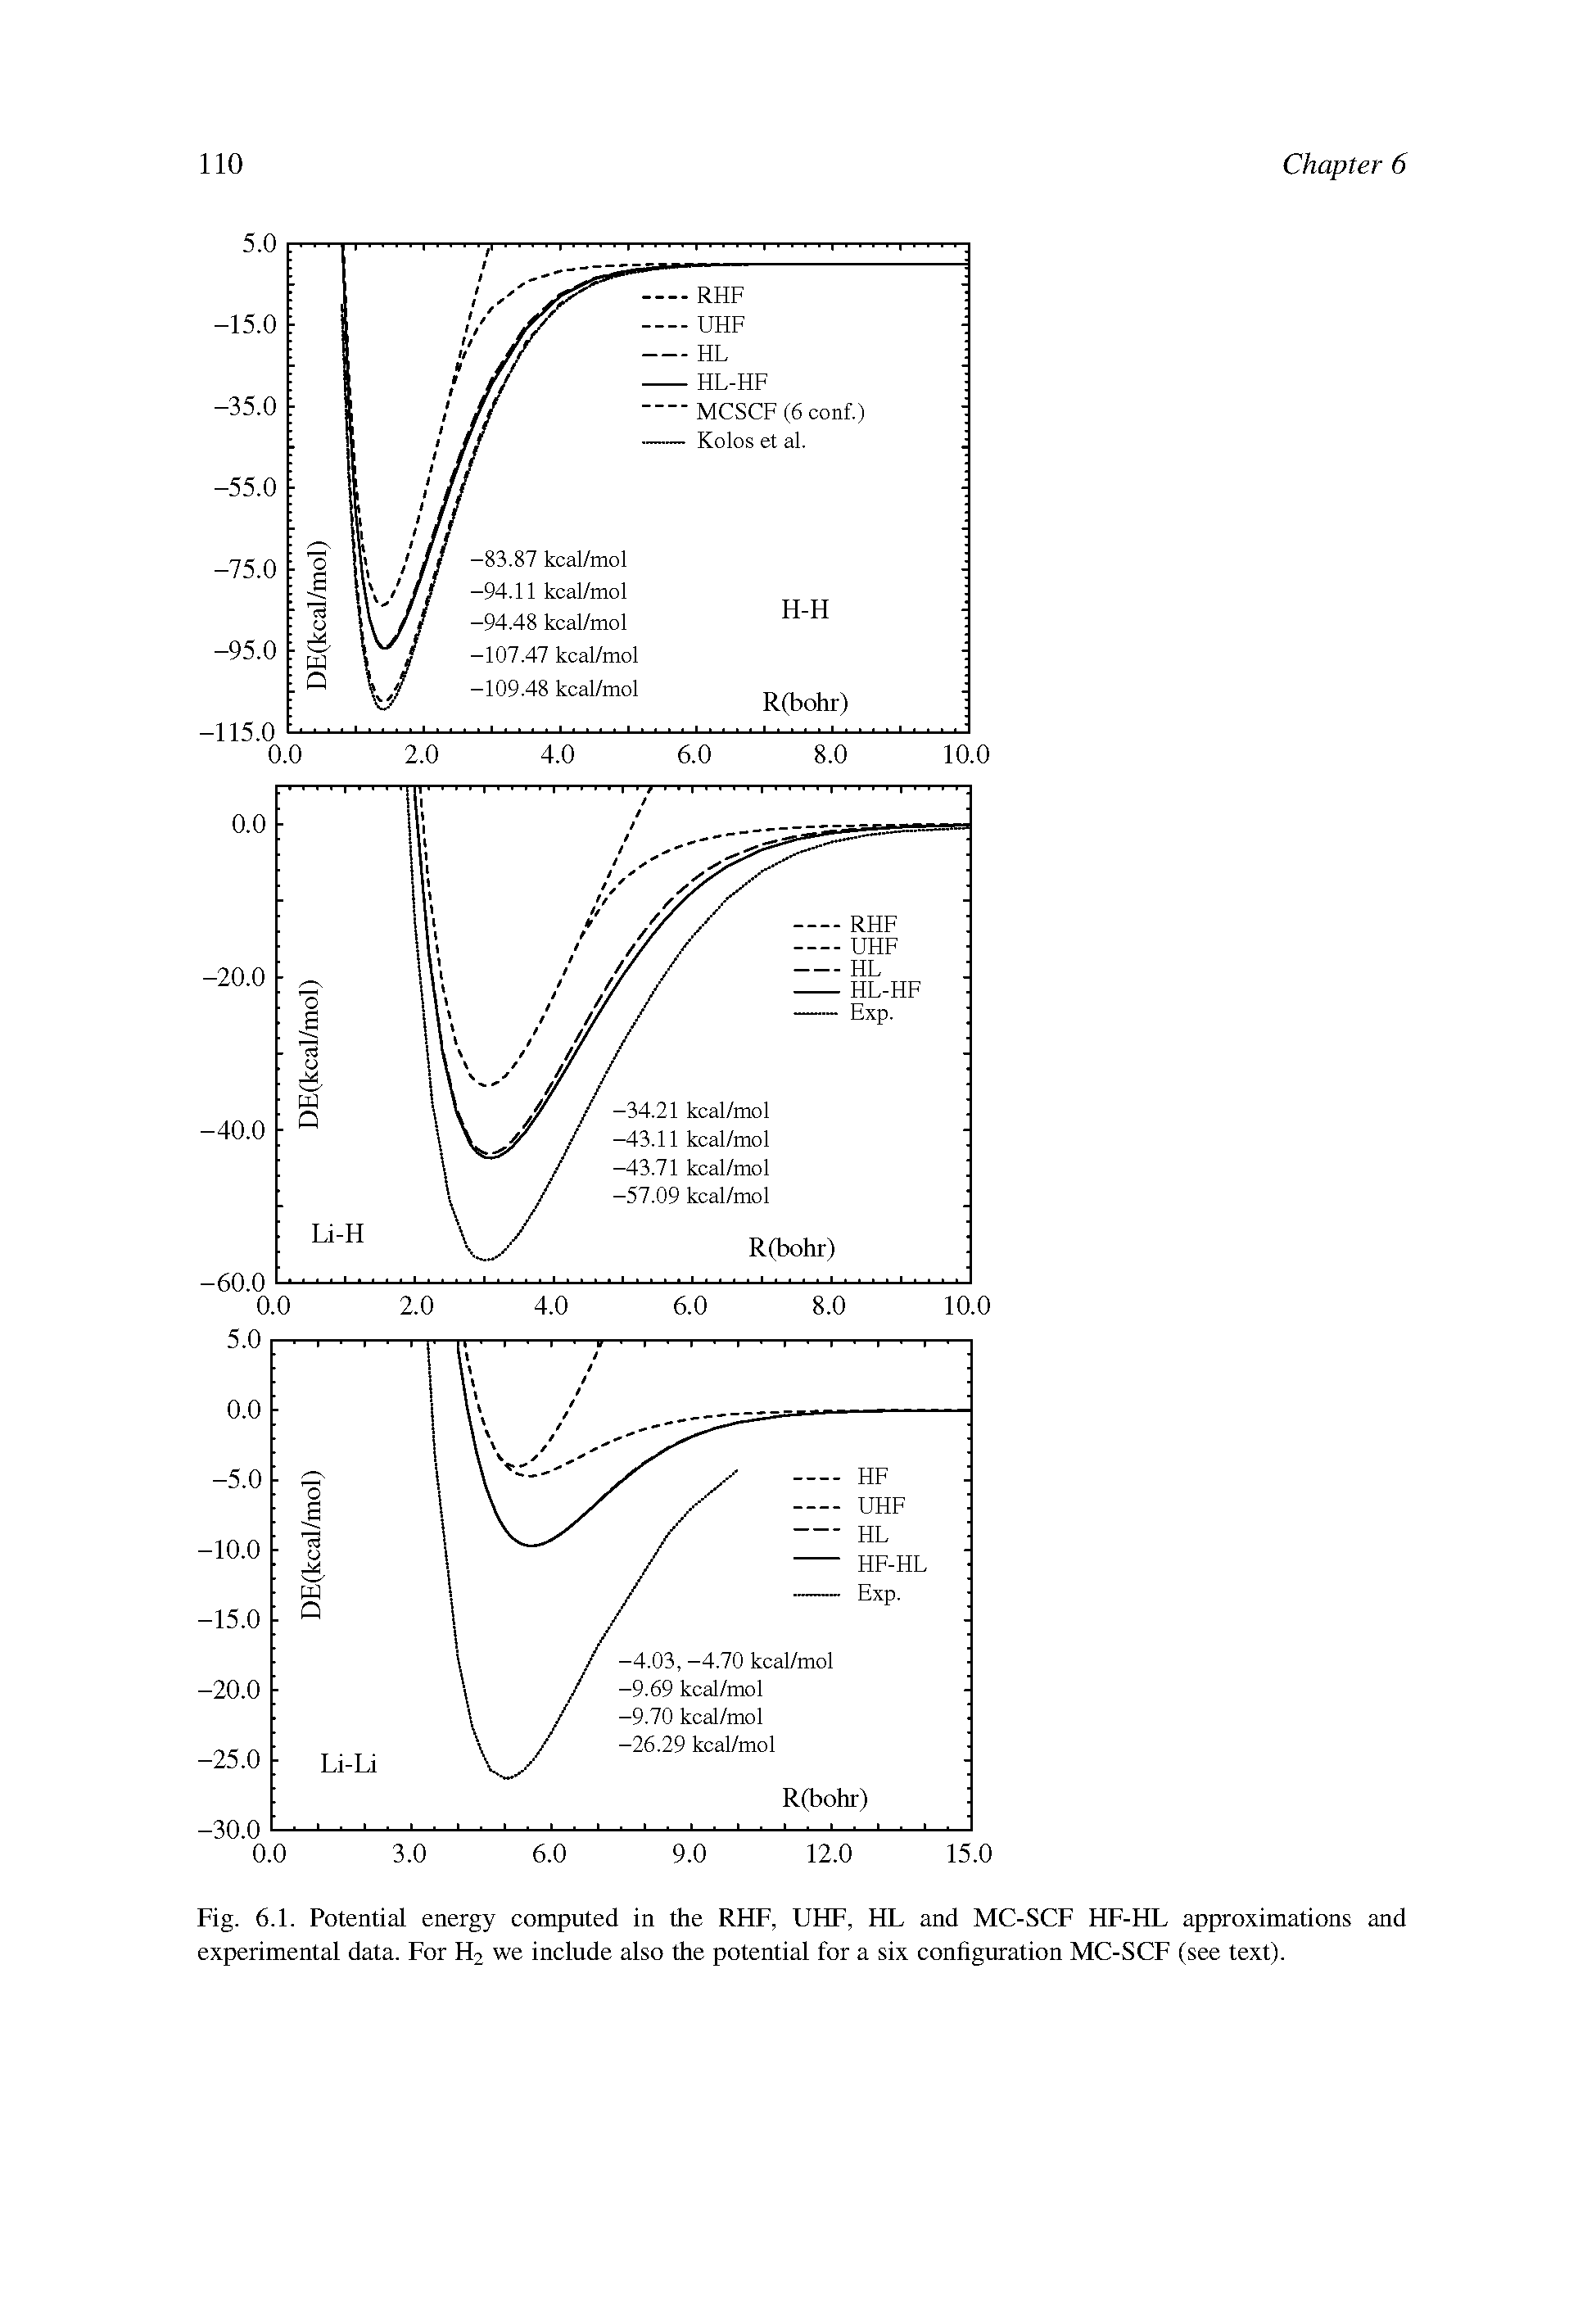 Fig. 6.1. Potential energy computed in the RHF, UHF, HL and MC-SCF HF-HL approximations and experimental data. For H2 we include also the potential for a six configuration MC-SCF (see text).